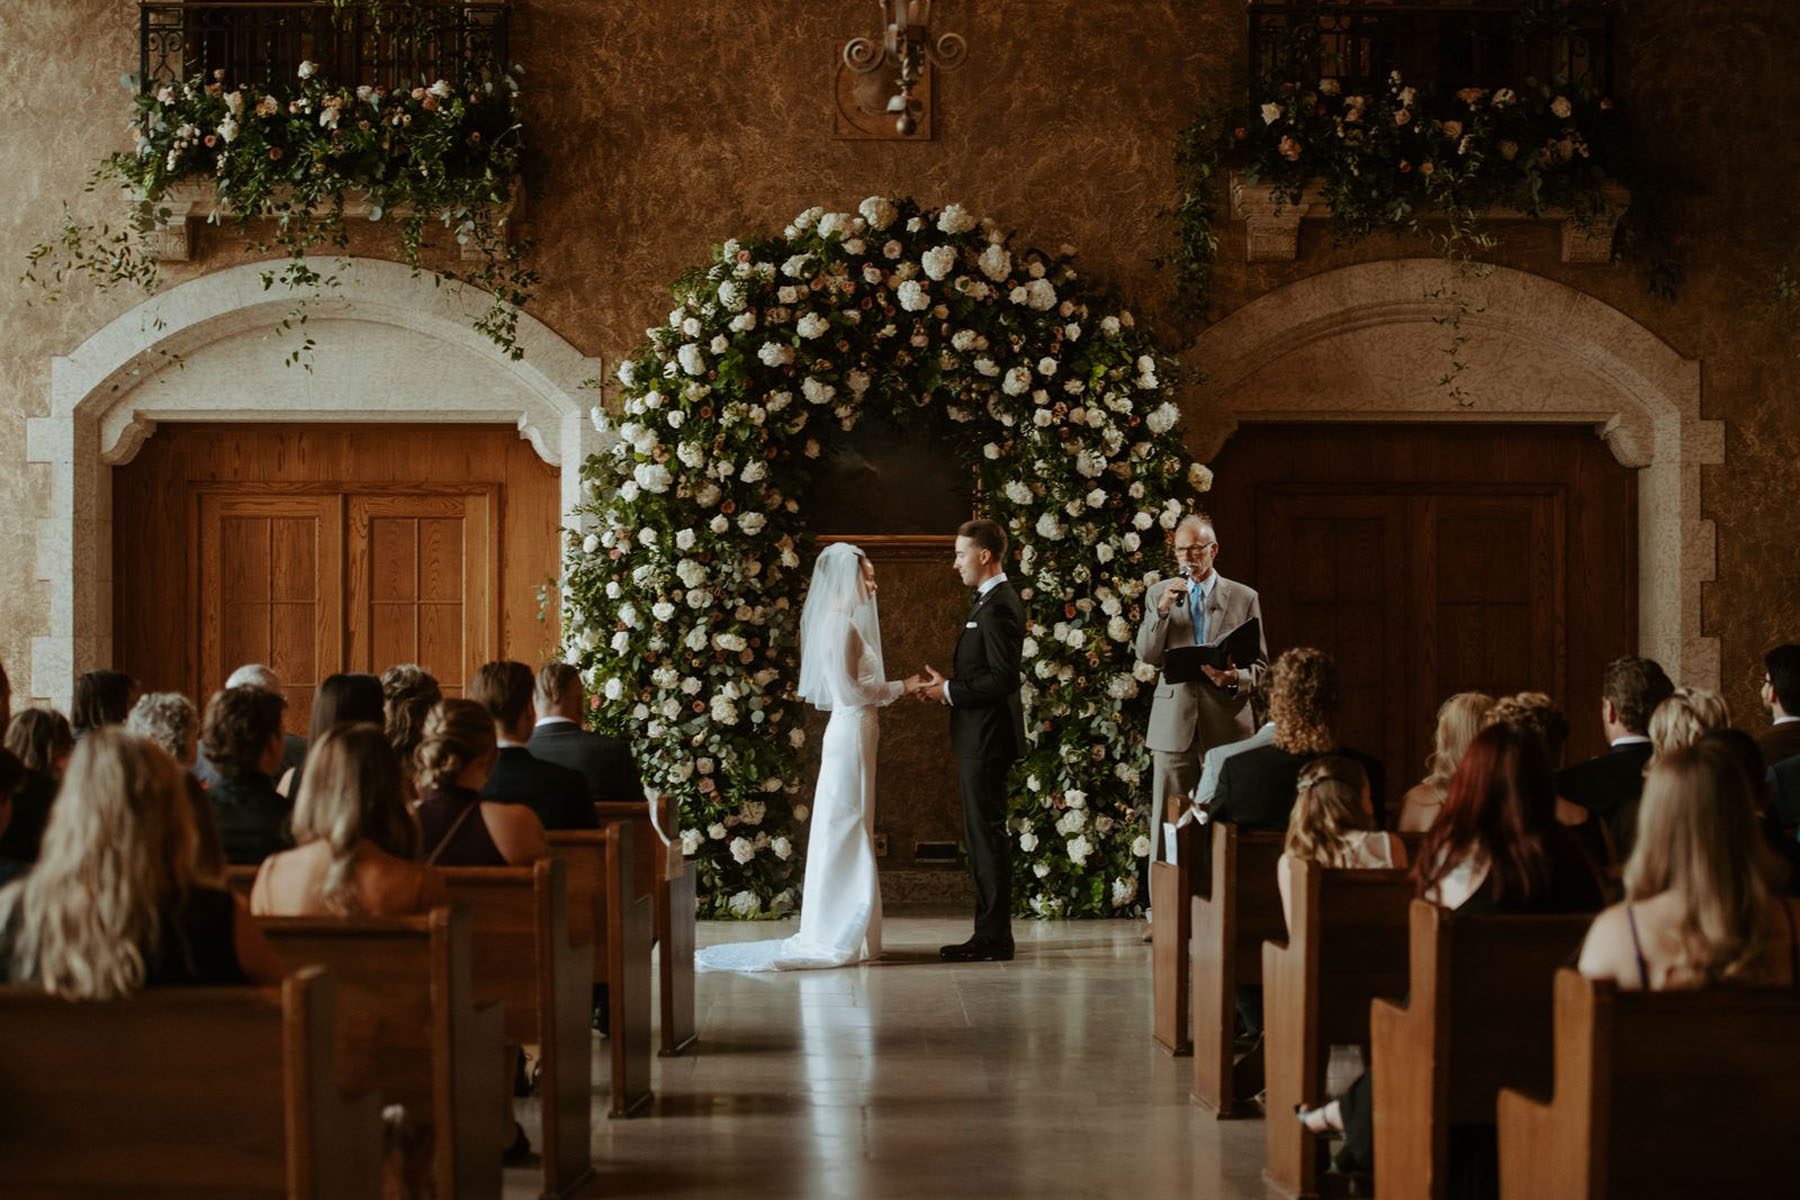 Bride and groom standing under a grand floral arch with white, blush and greenery.